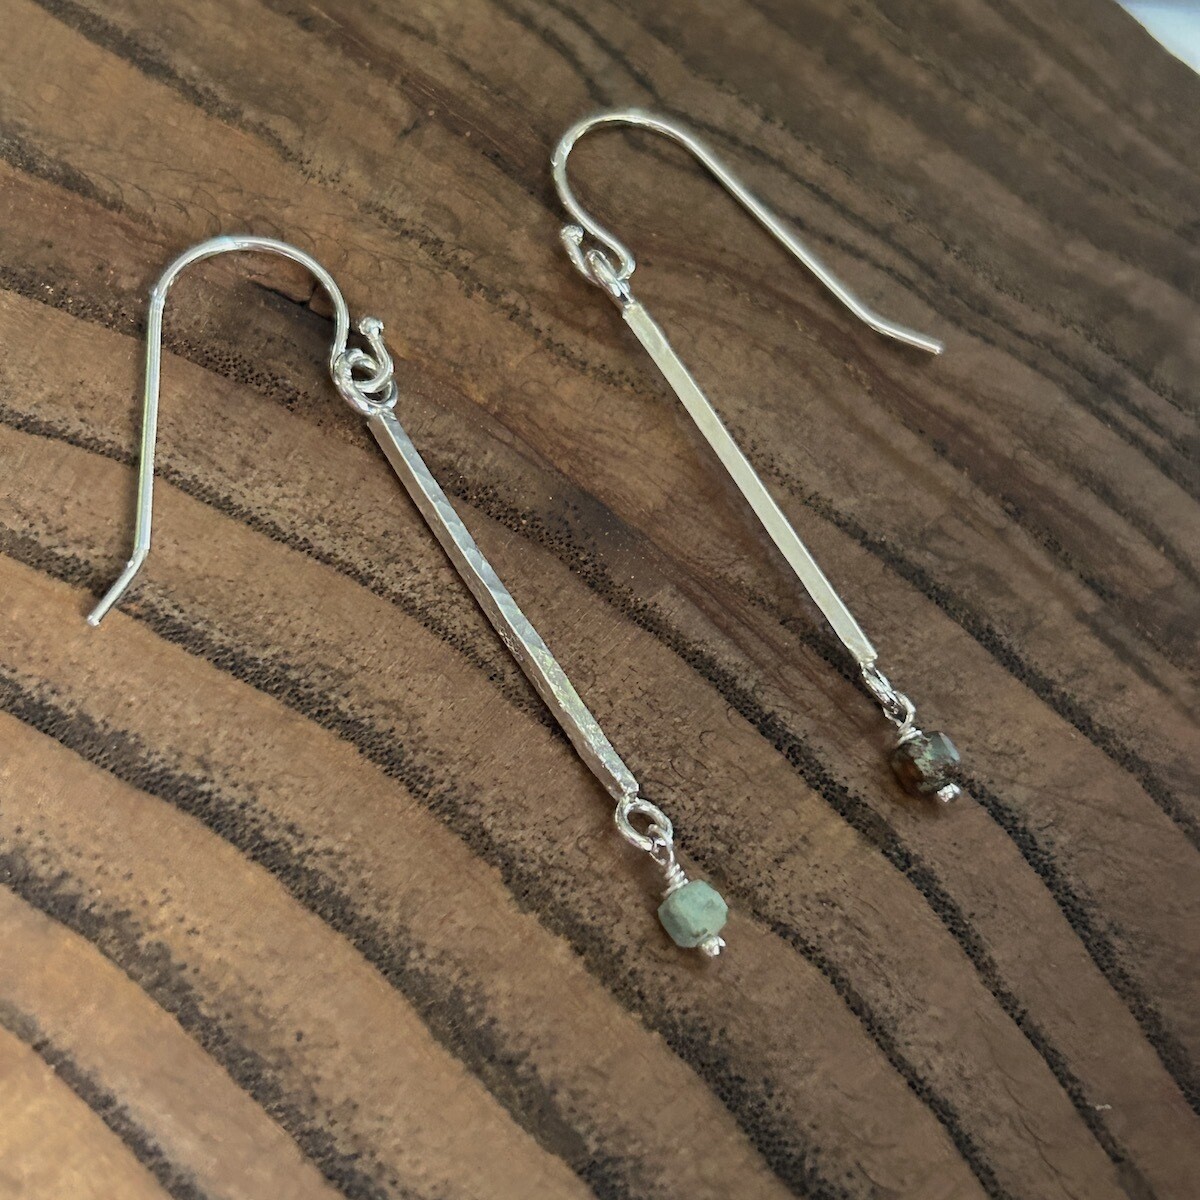 Handmade Silver Earrings with hammered square wire, turquoise cube